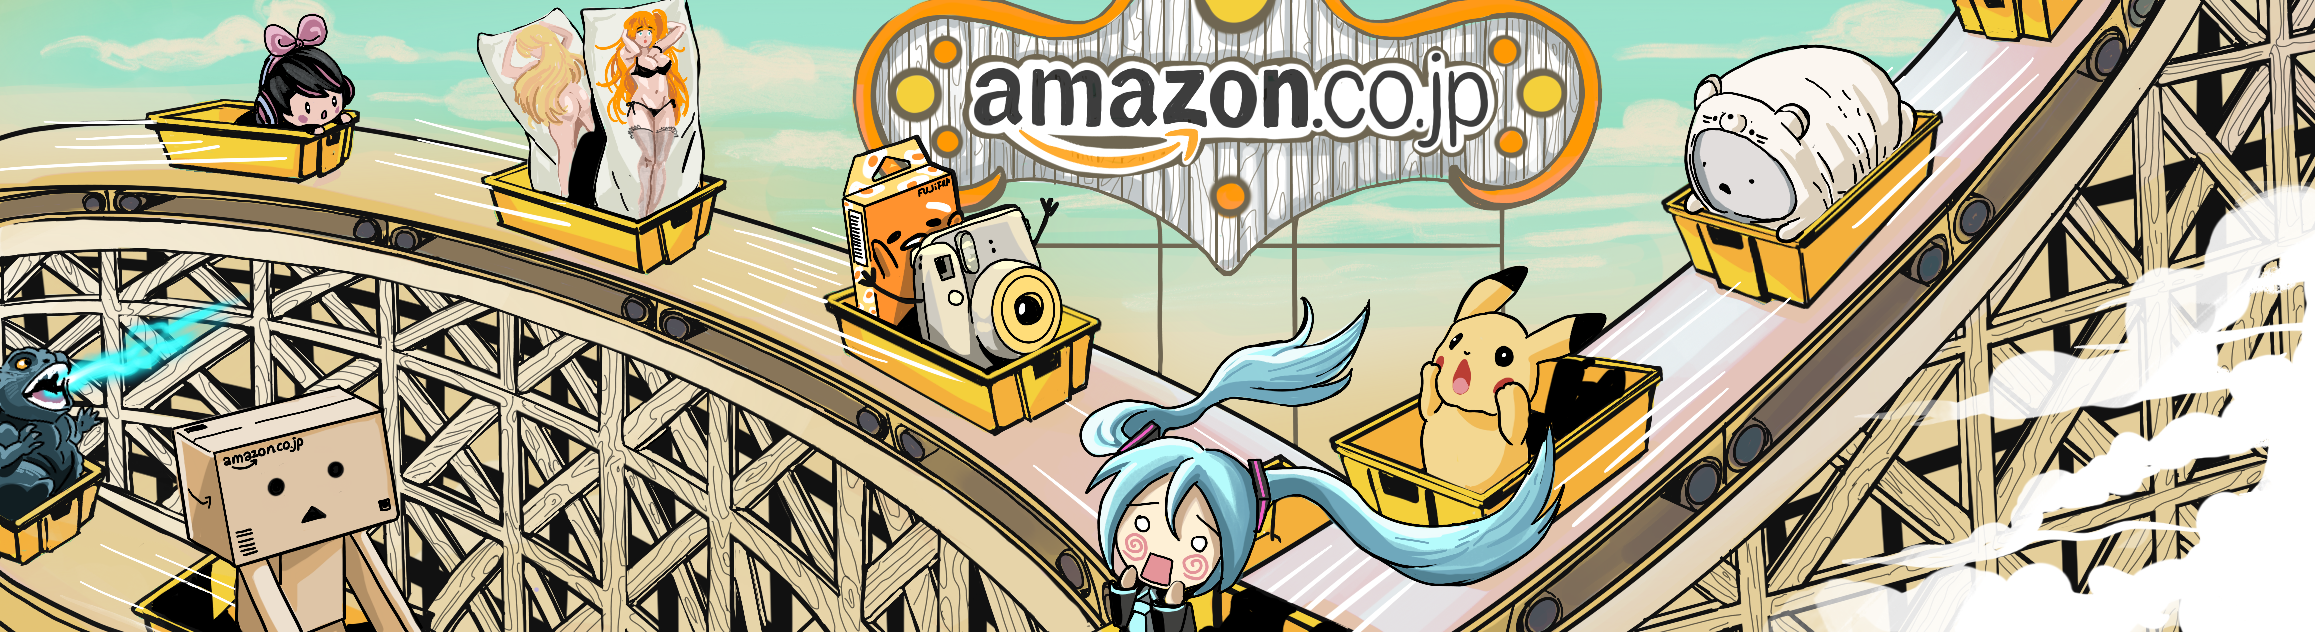 Various Amazon Japan products on conveyor belts stylized as a rollercoaster.